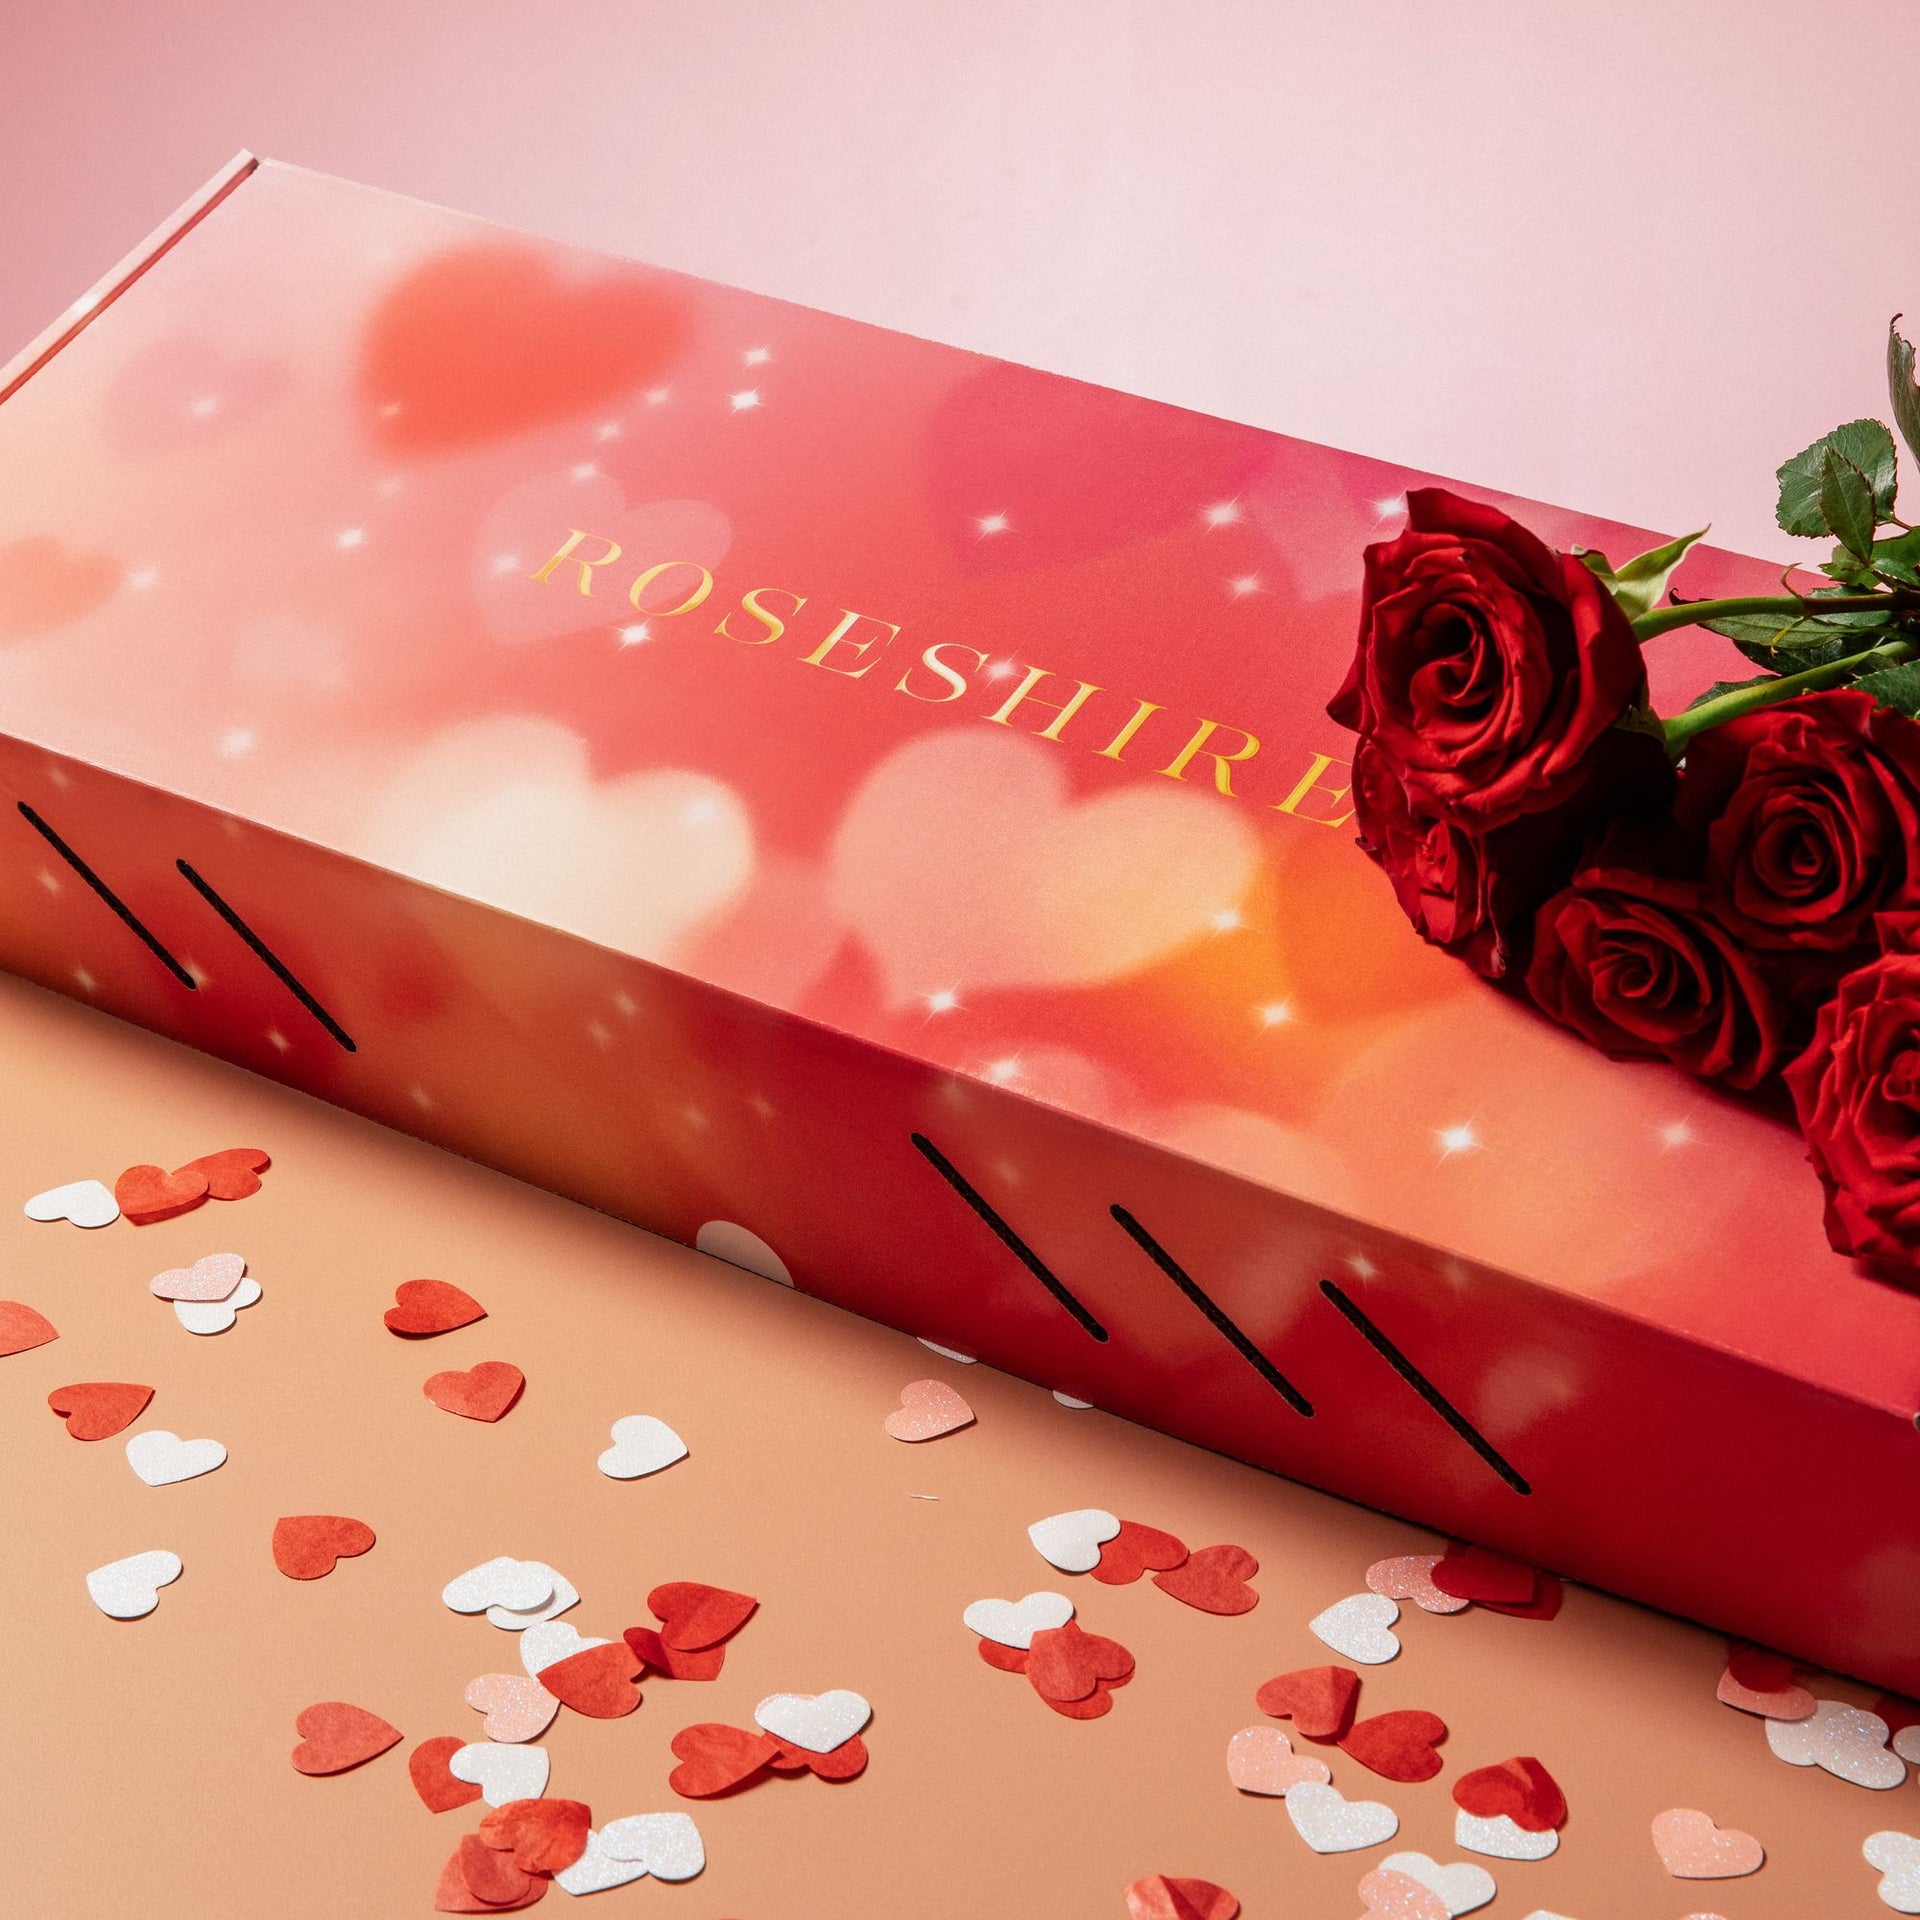 Amazing Love designed with flowers and roses in a luxury box